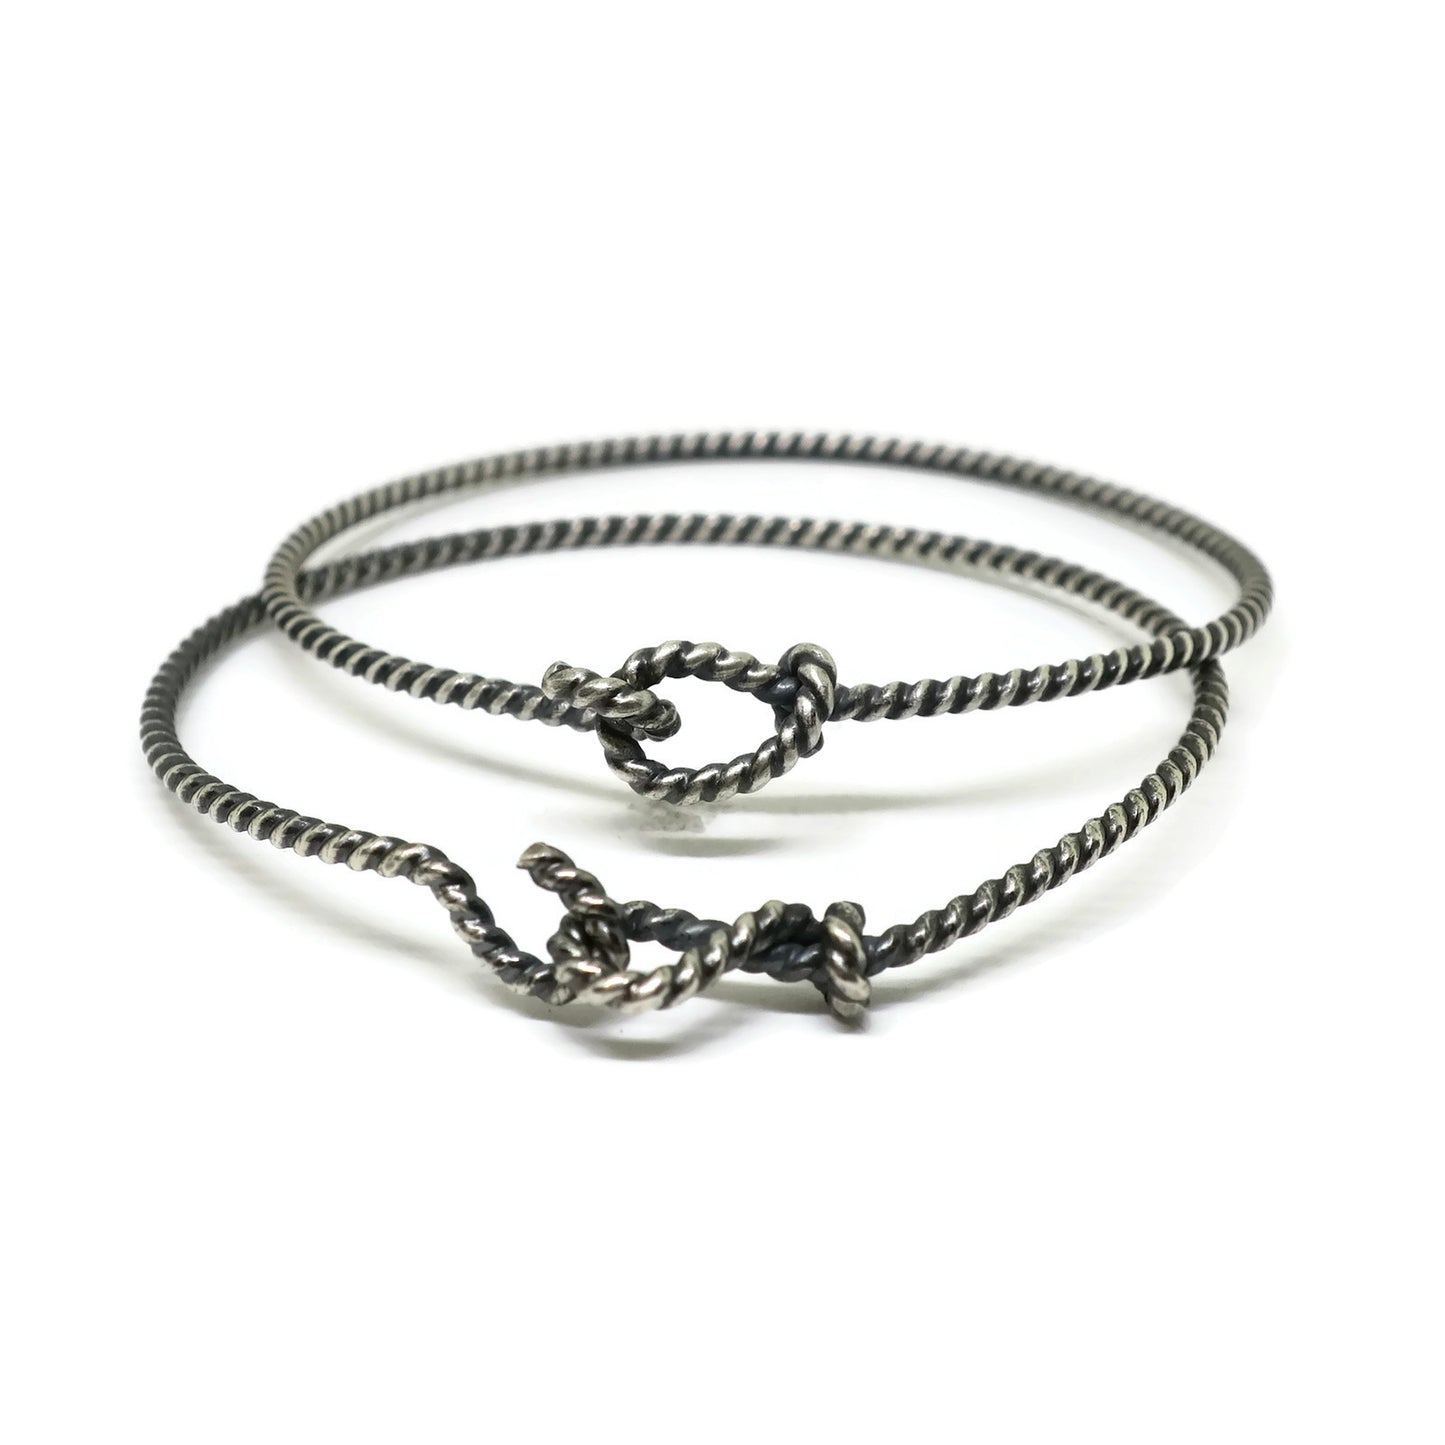 forget-me-knot rope bangle